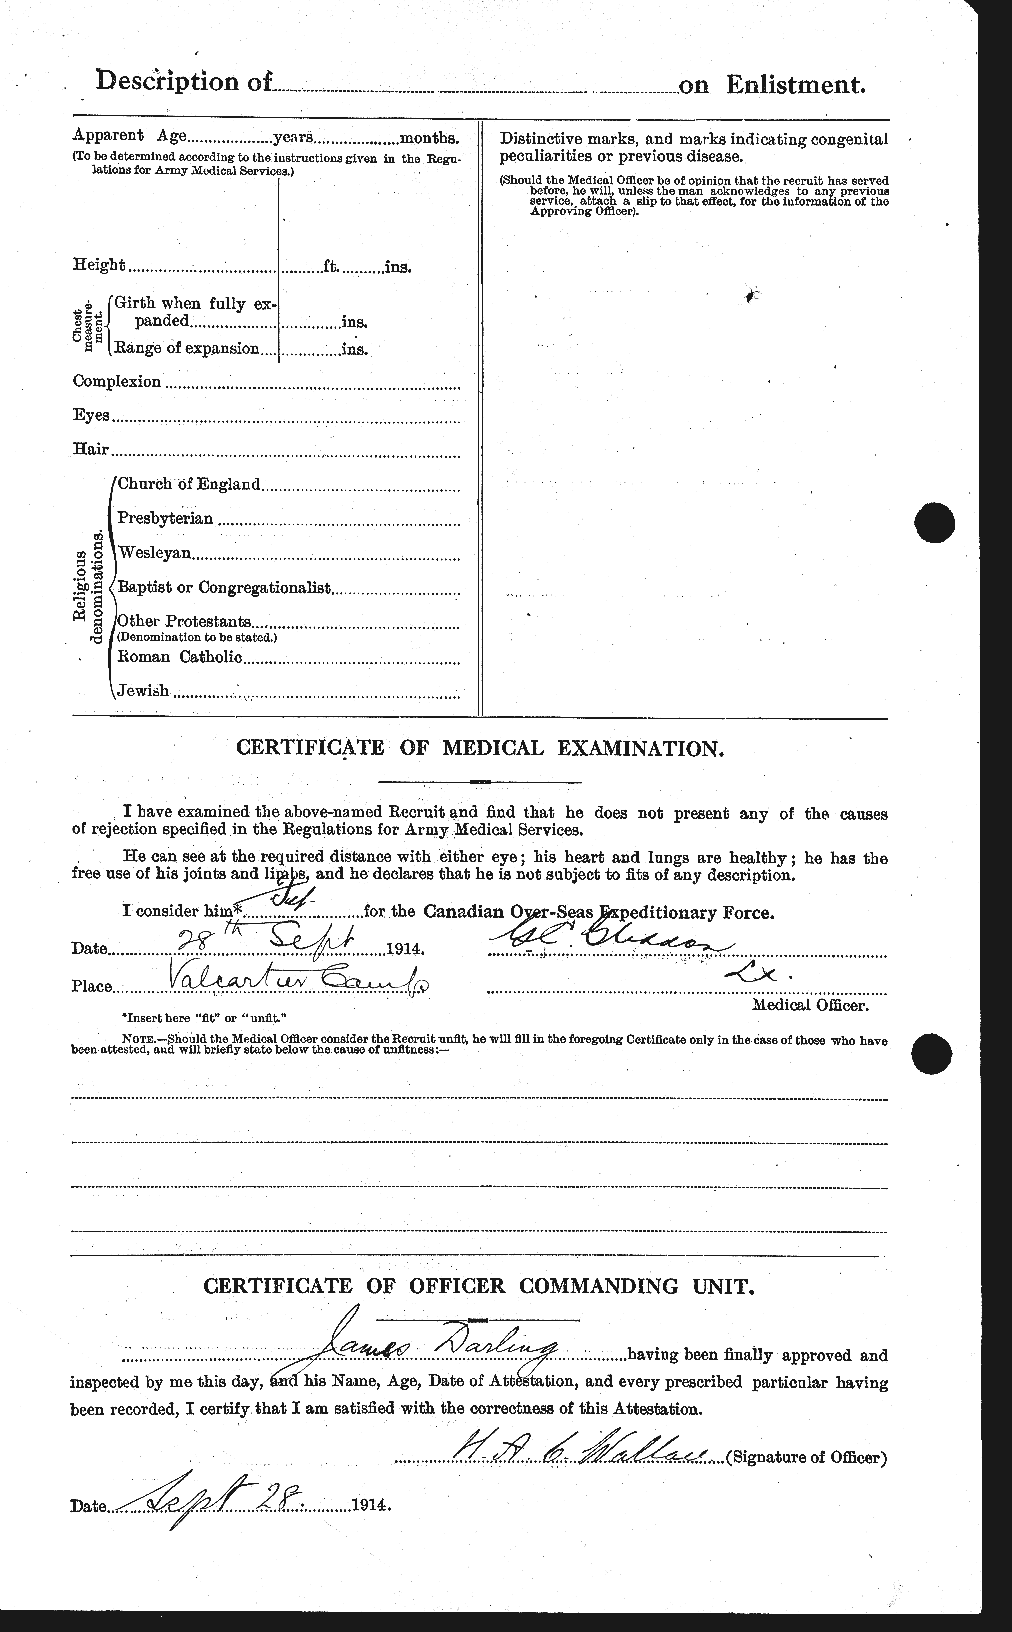 Personnel Records of the First World War - CEF 280199b